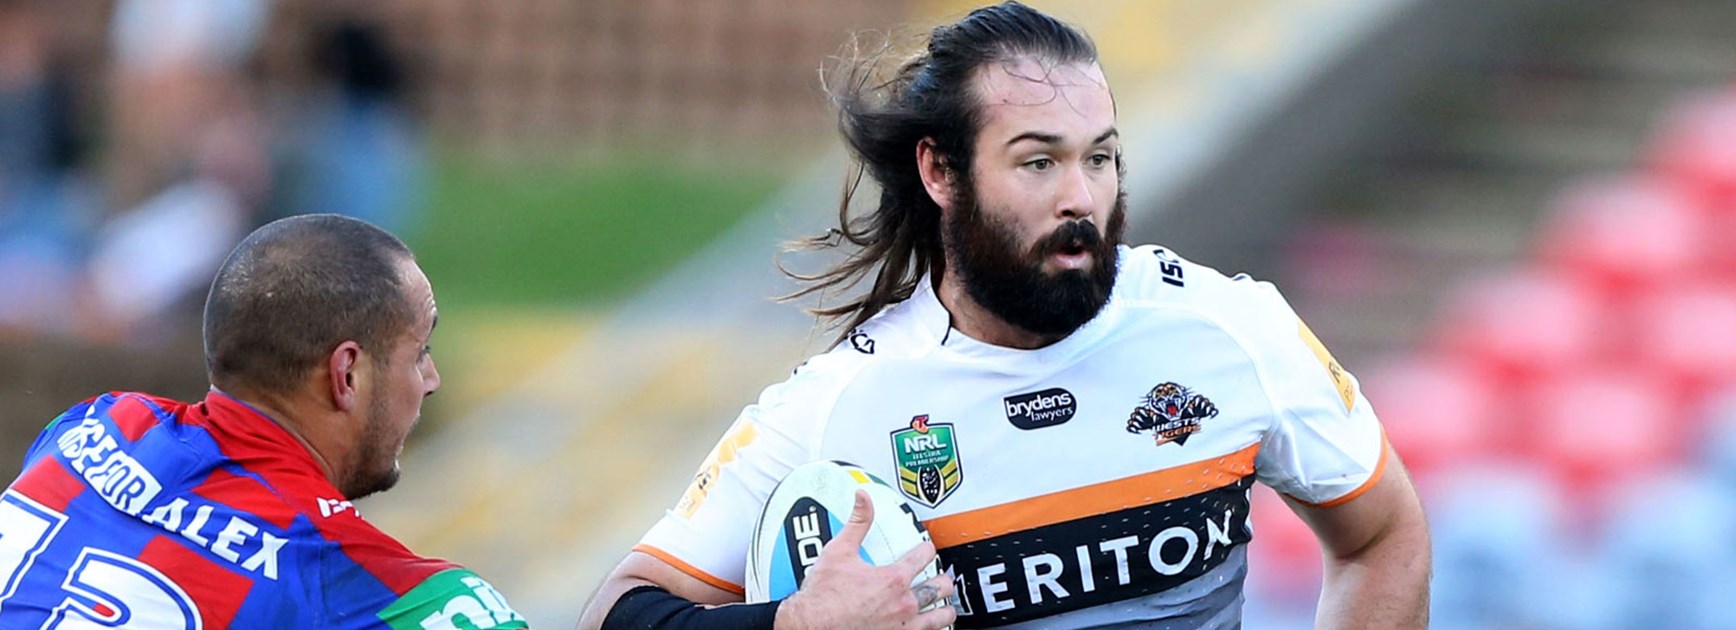 Wests Tigers prop Aaron Woods takes a hit-up against the Knights in Round 10.